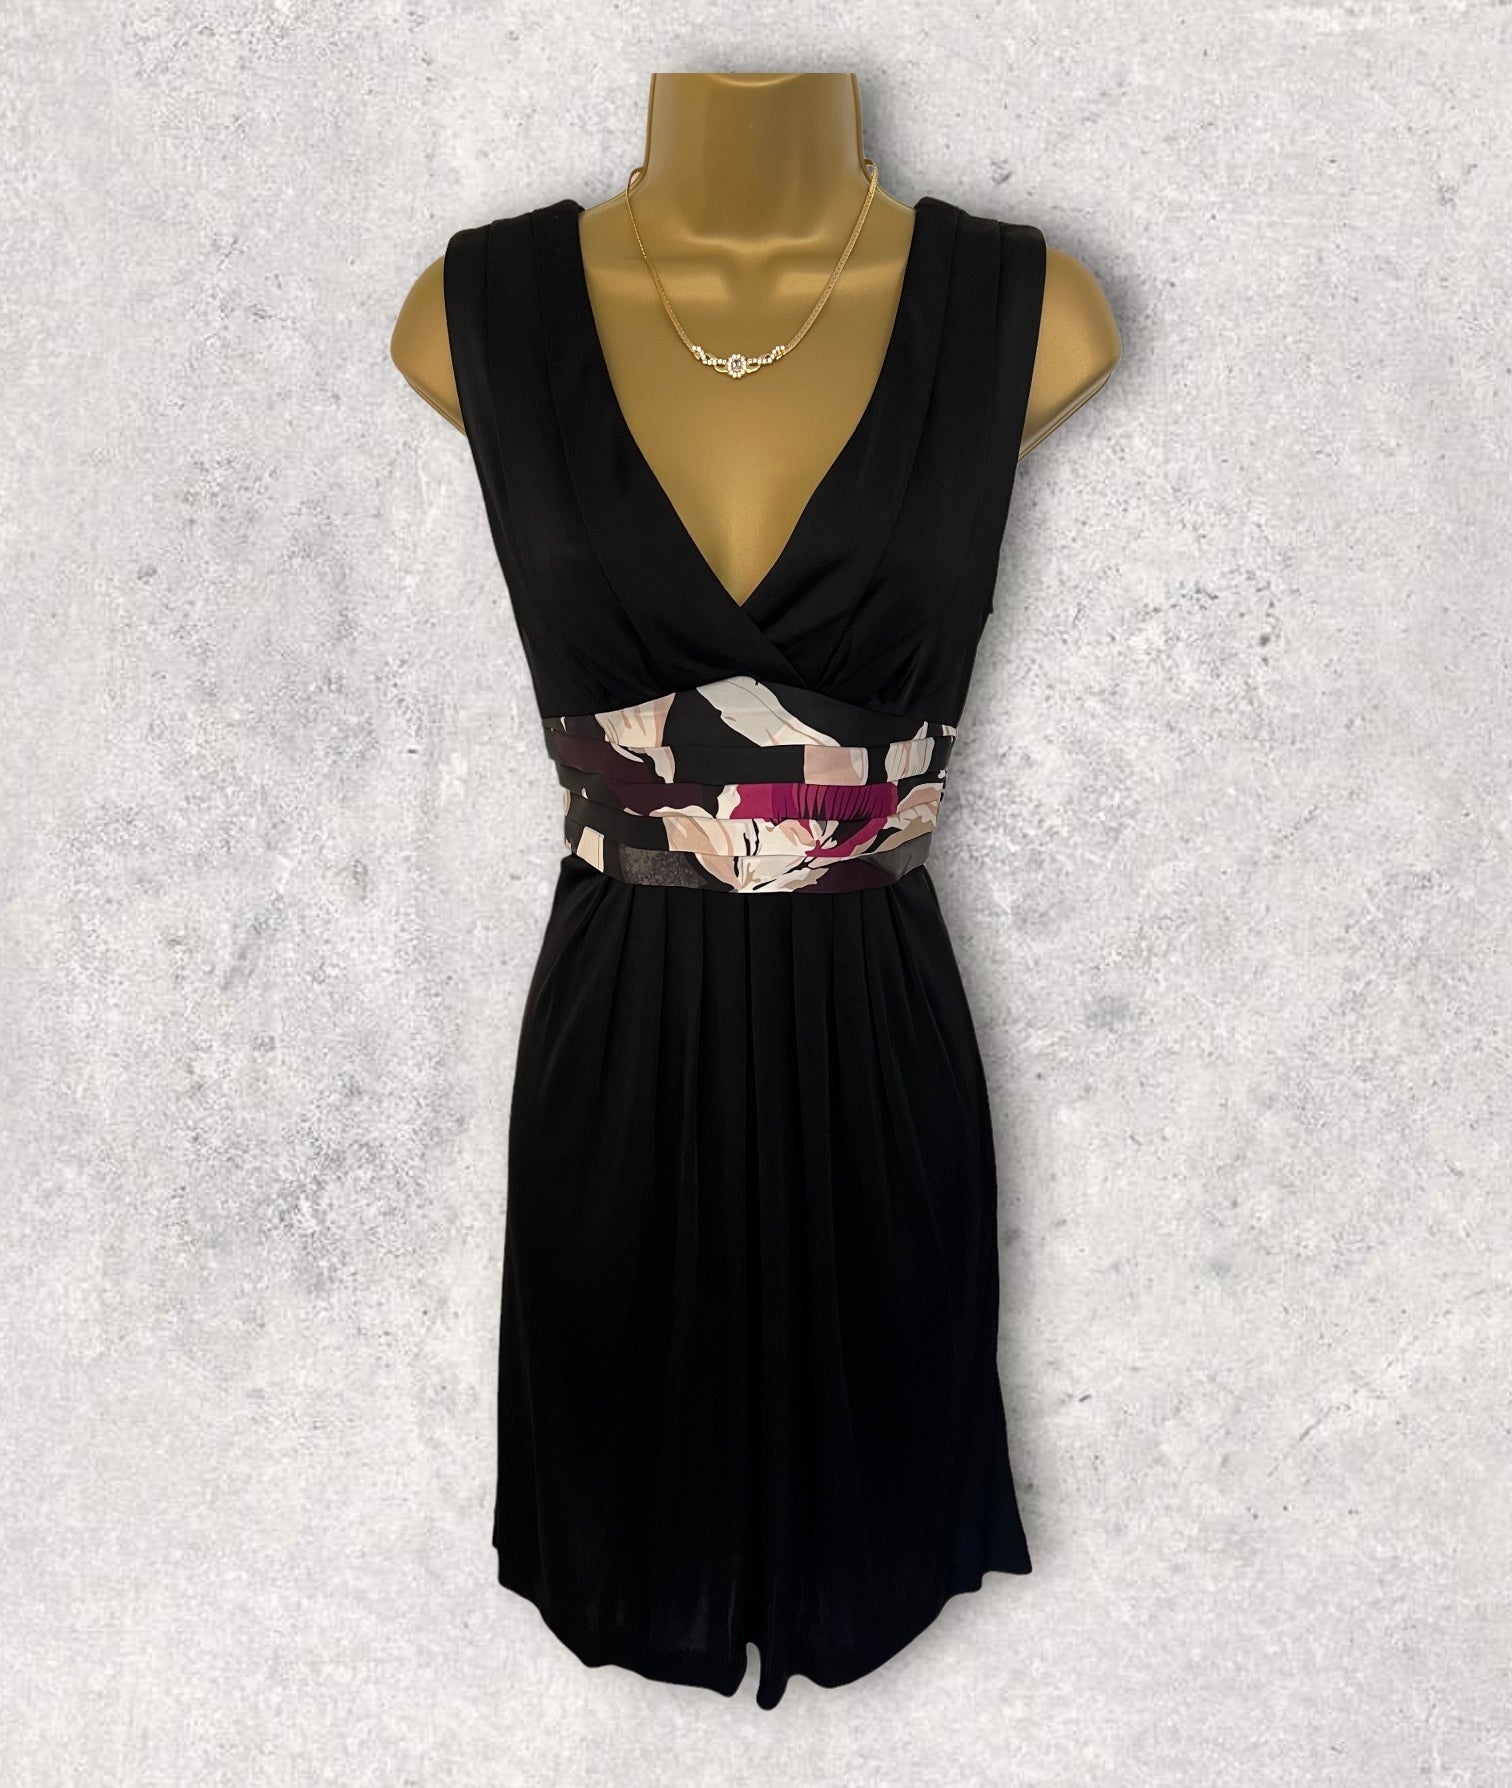 Ted Baker Black Silky Floral Tie Fit & Flare Dress UK 8 US 4 EU 36 Timeless Fashions